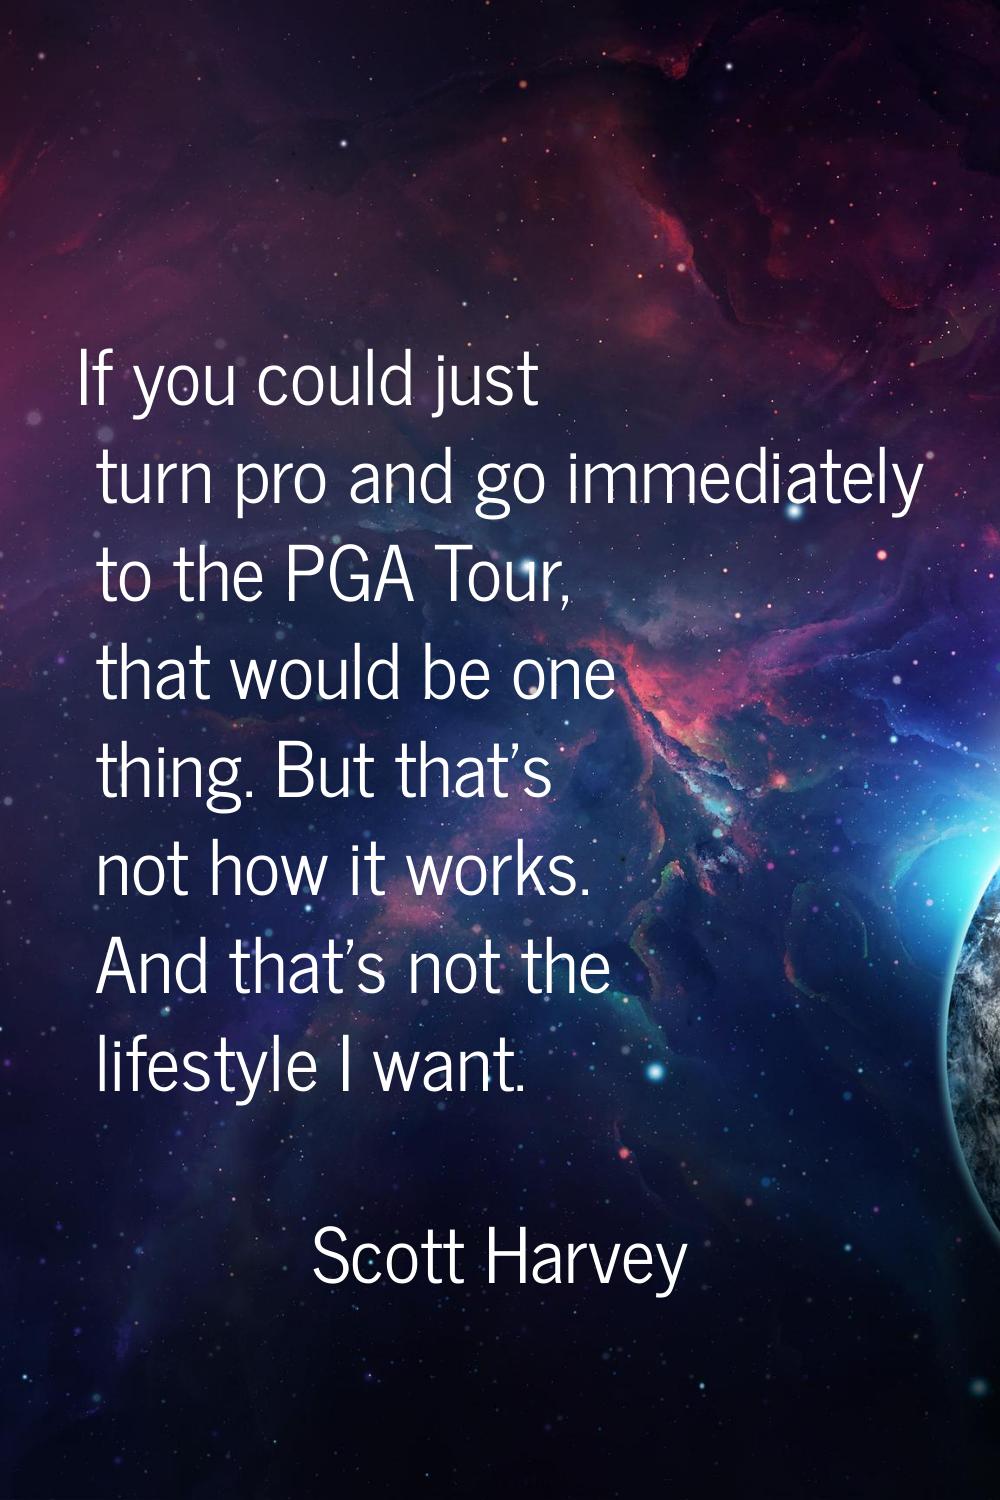 If you could just turn pro and go immediately to the PGA Tour, that would be one thing. But that's 